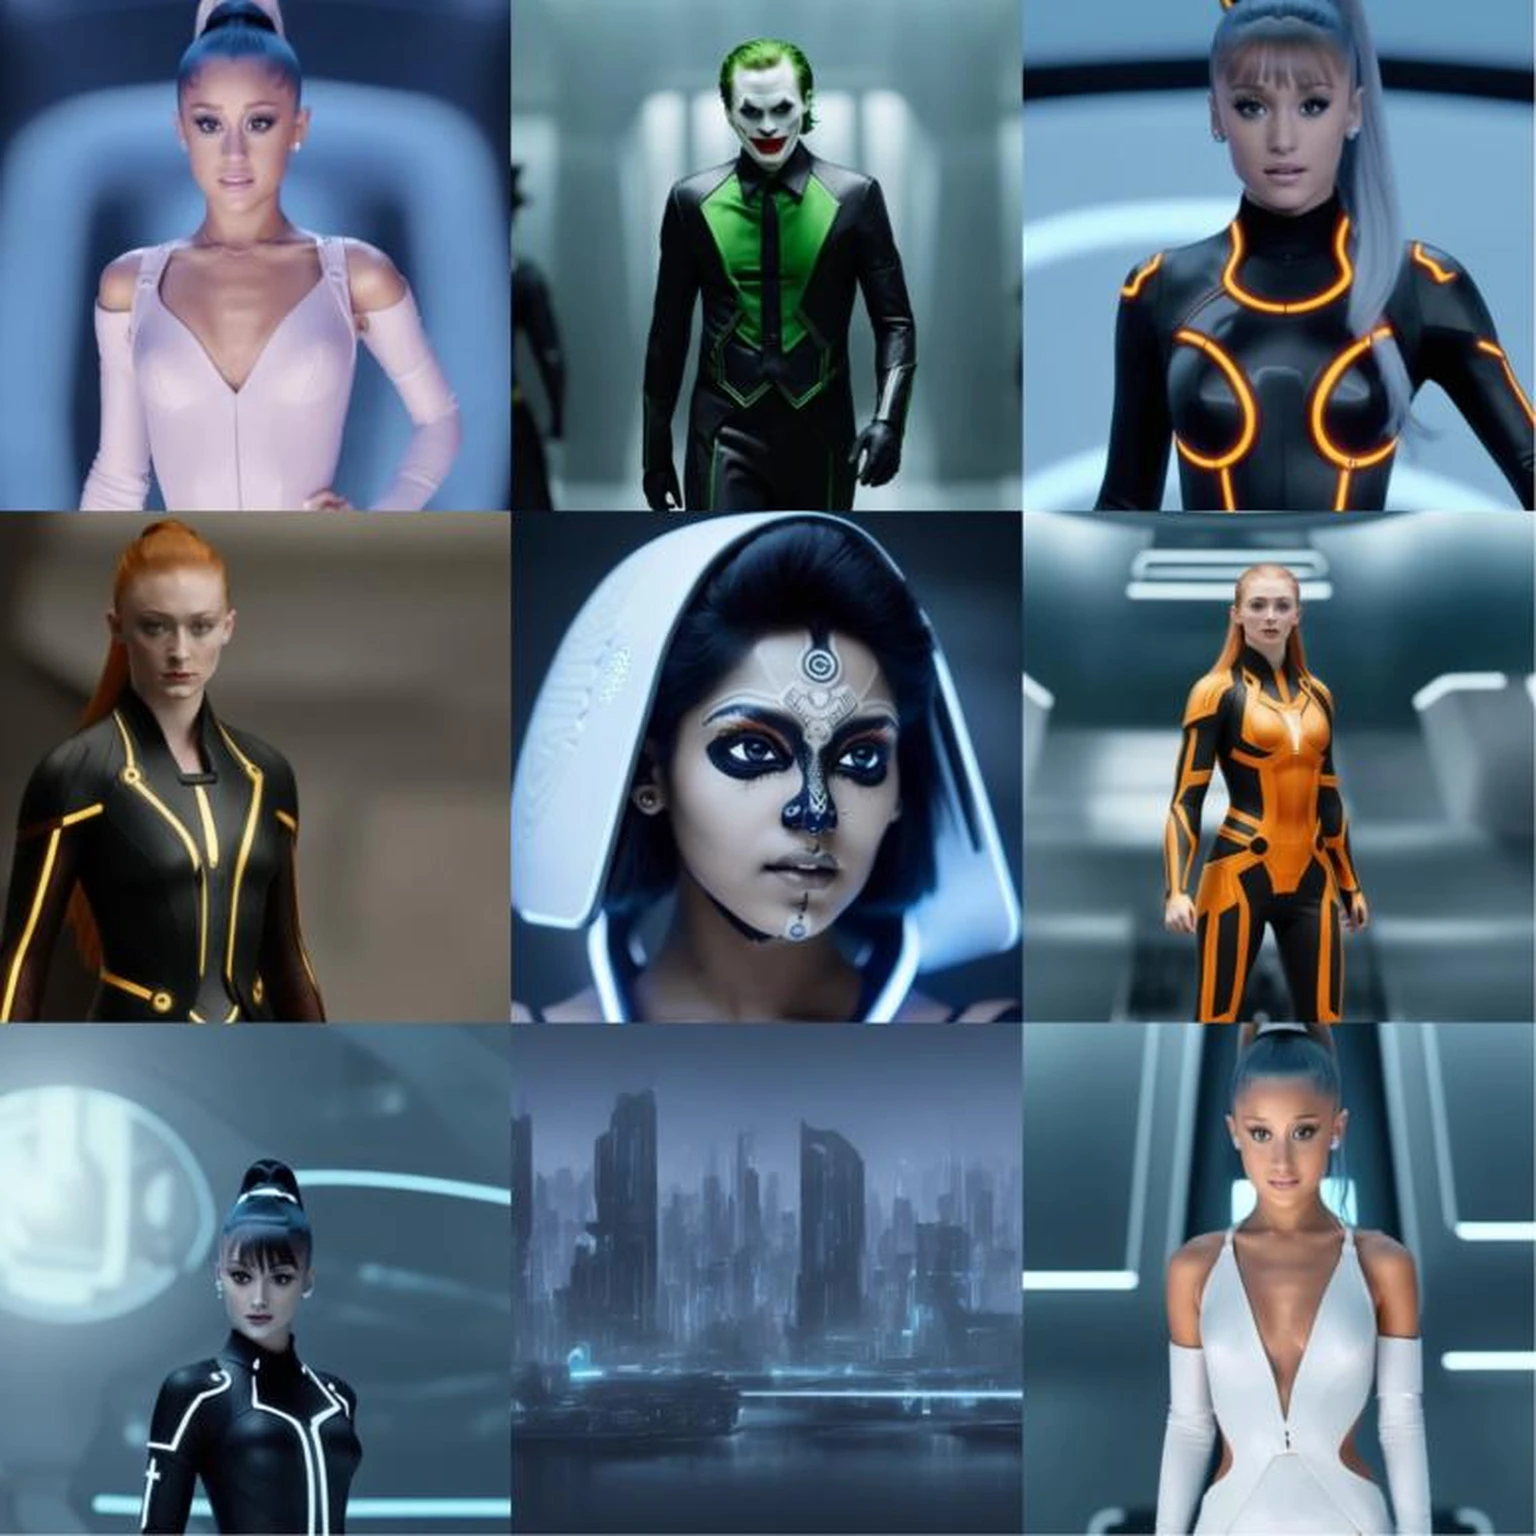 Example of images created using Tron Legacy Diffusion model.